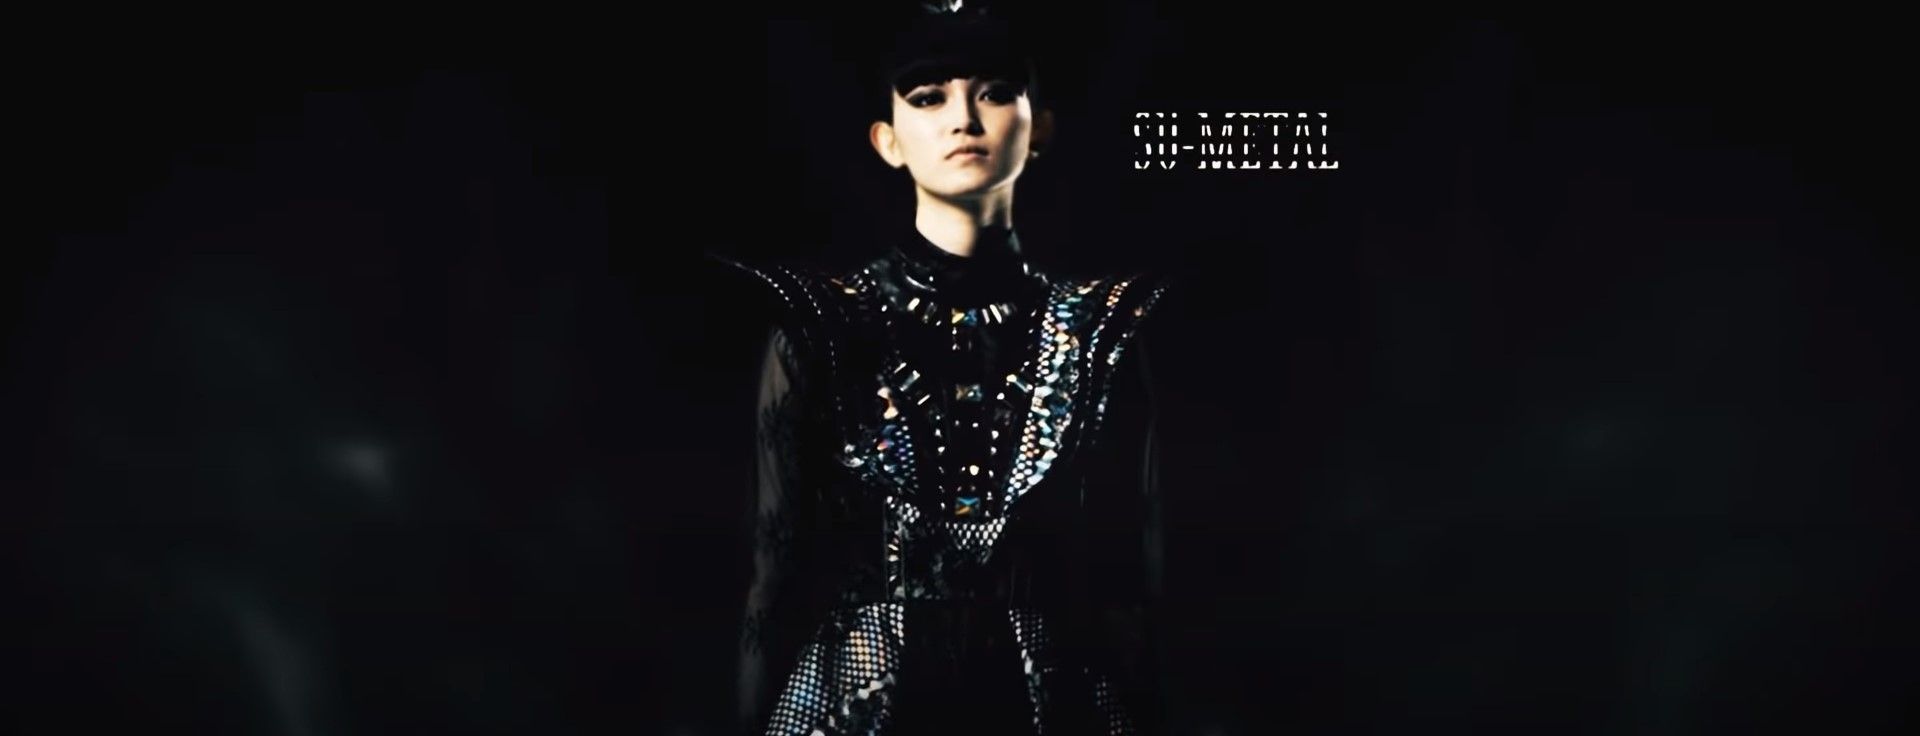 Babymetal - BxMxC (Official)